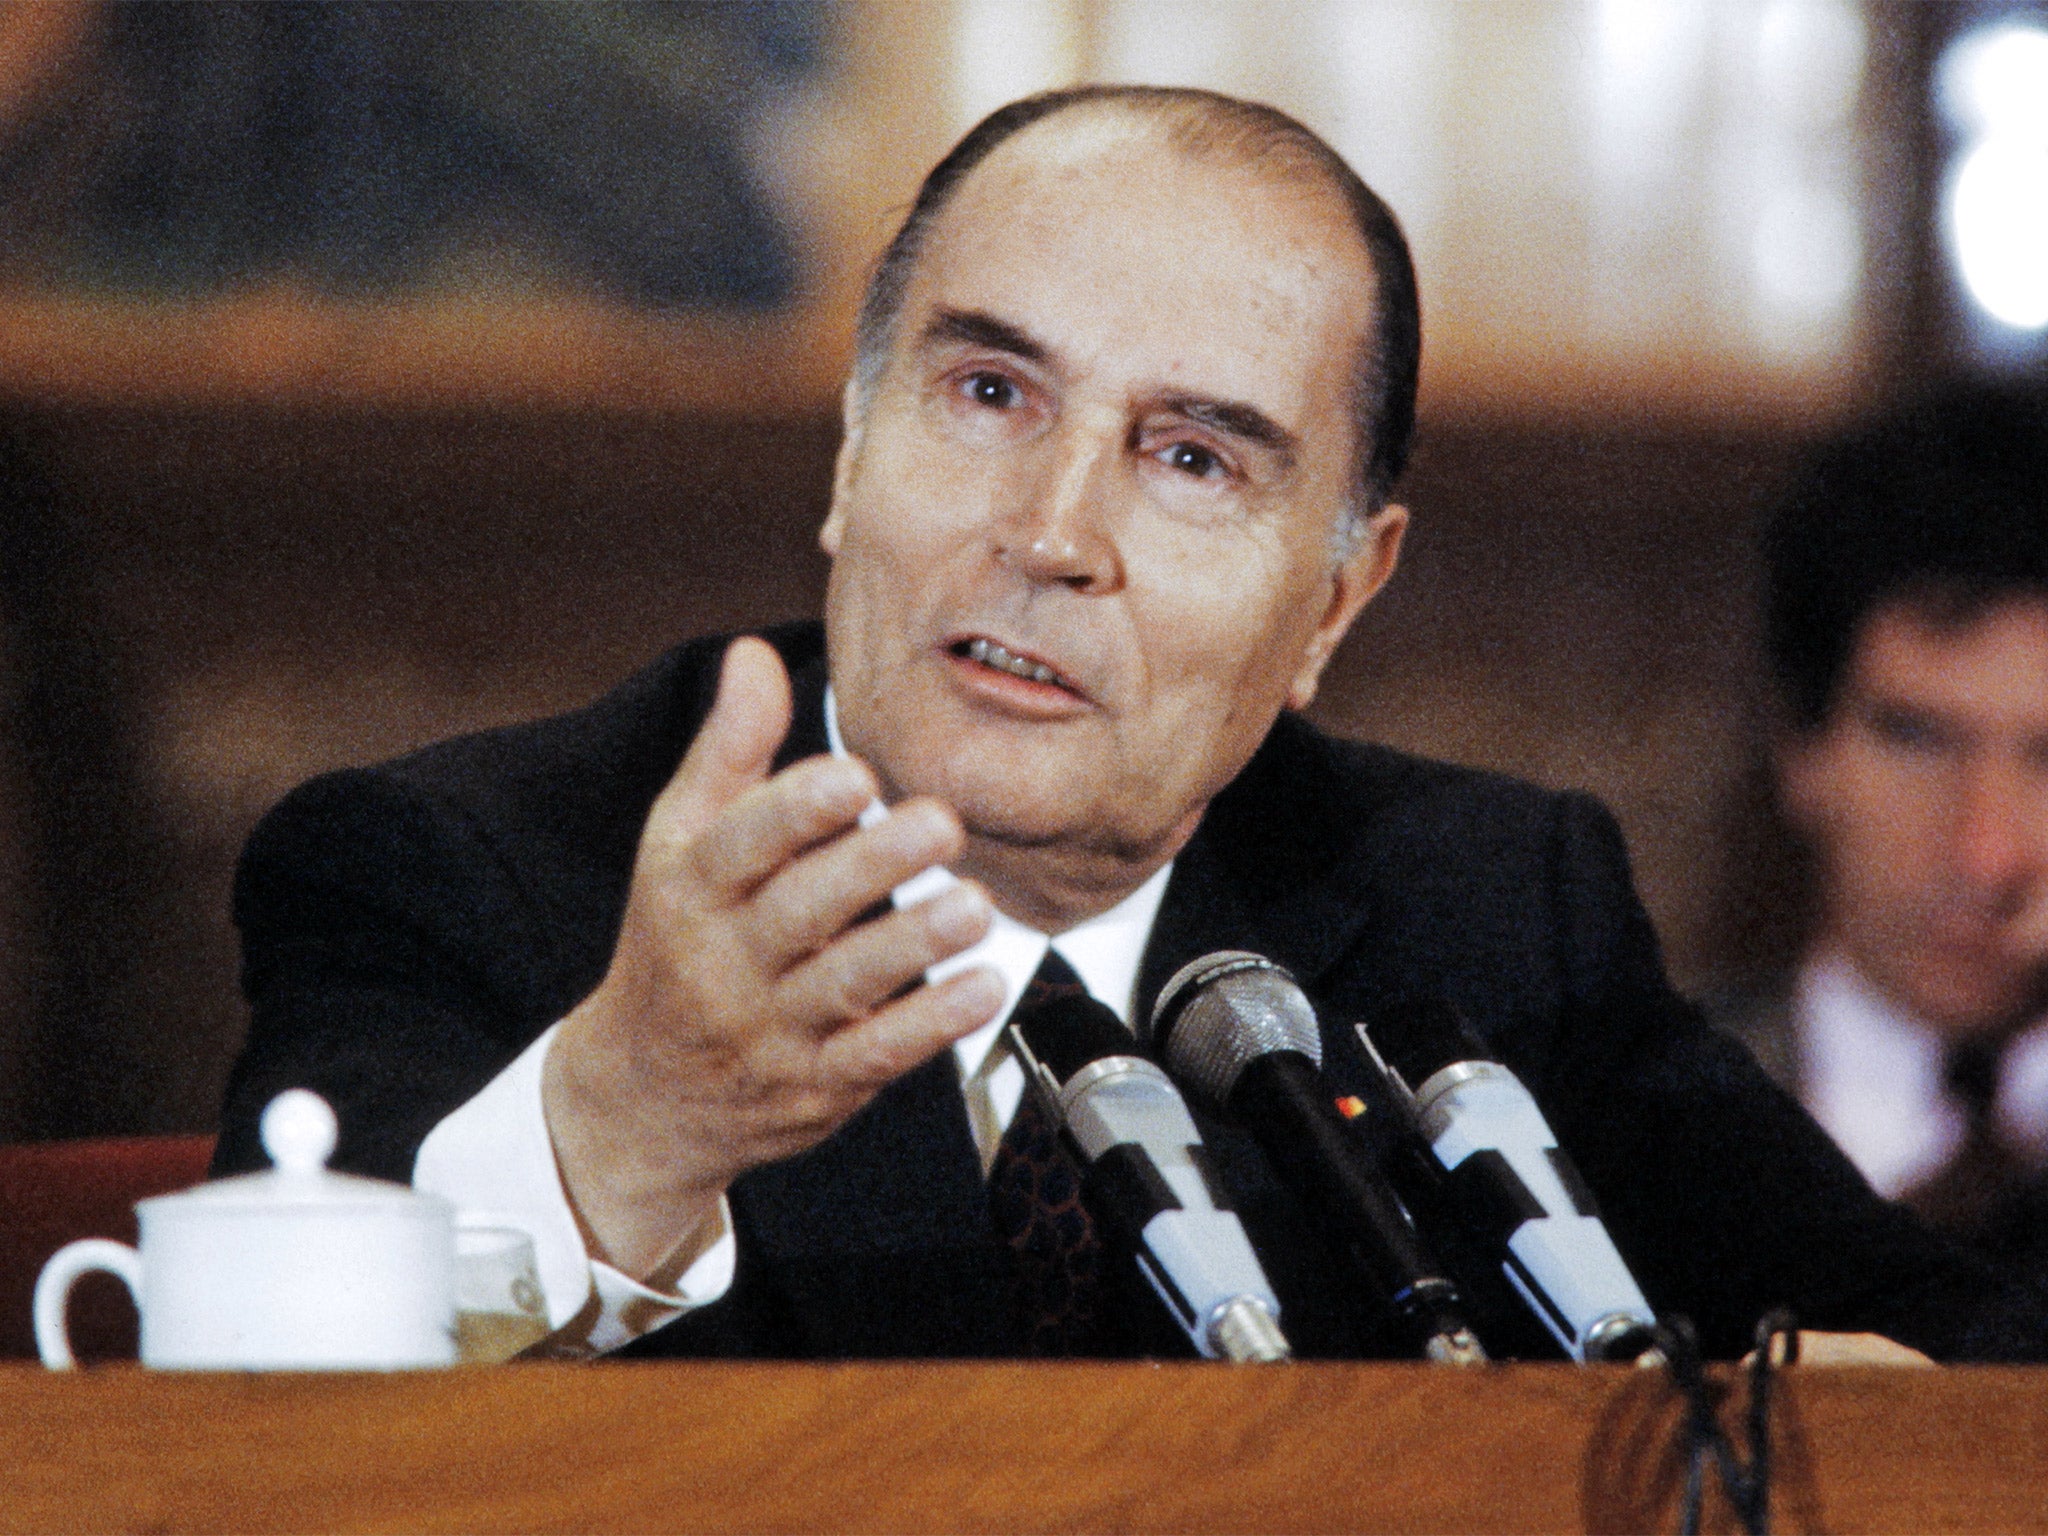 François Mitterand, the former French president, believed the single currency would help other European countries regain power lost to Germany